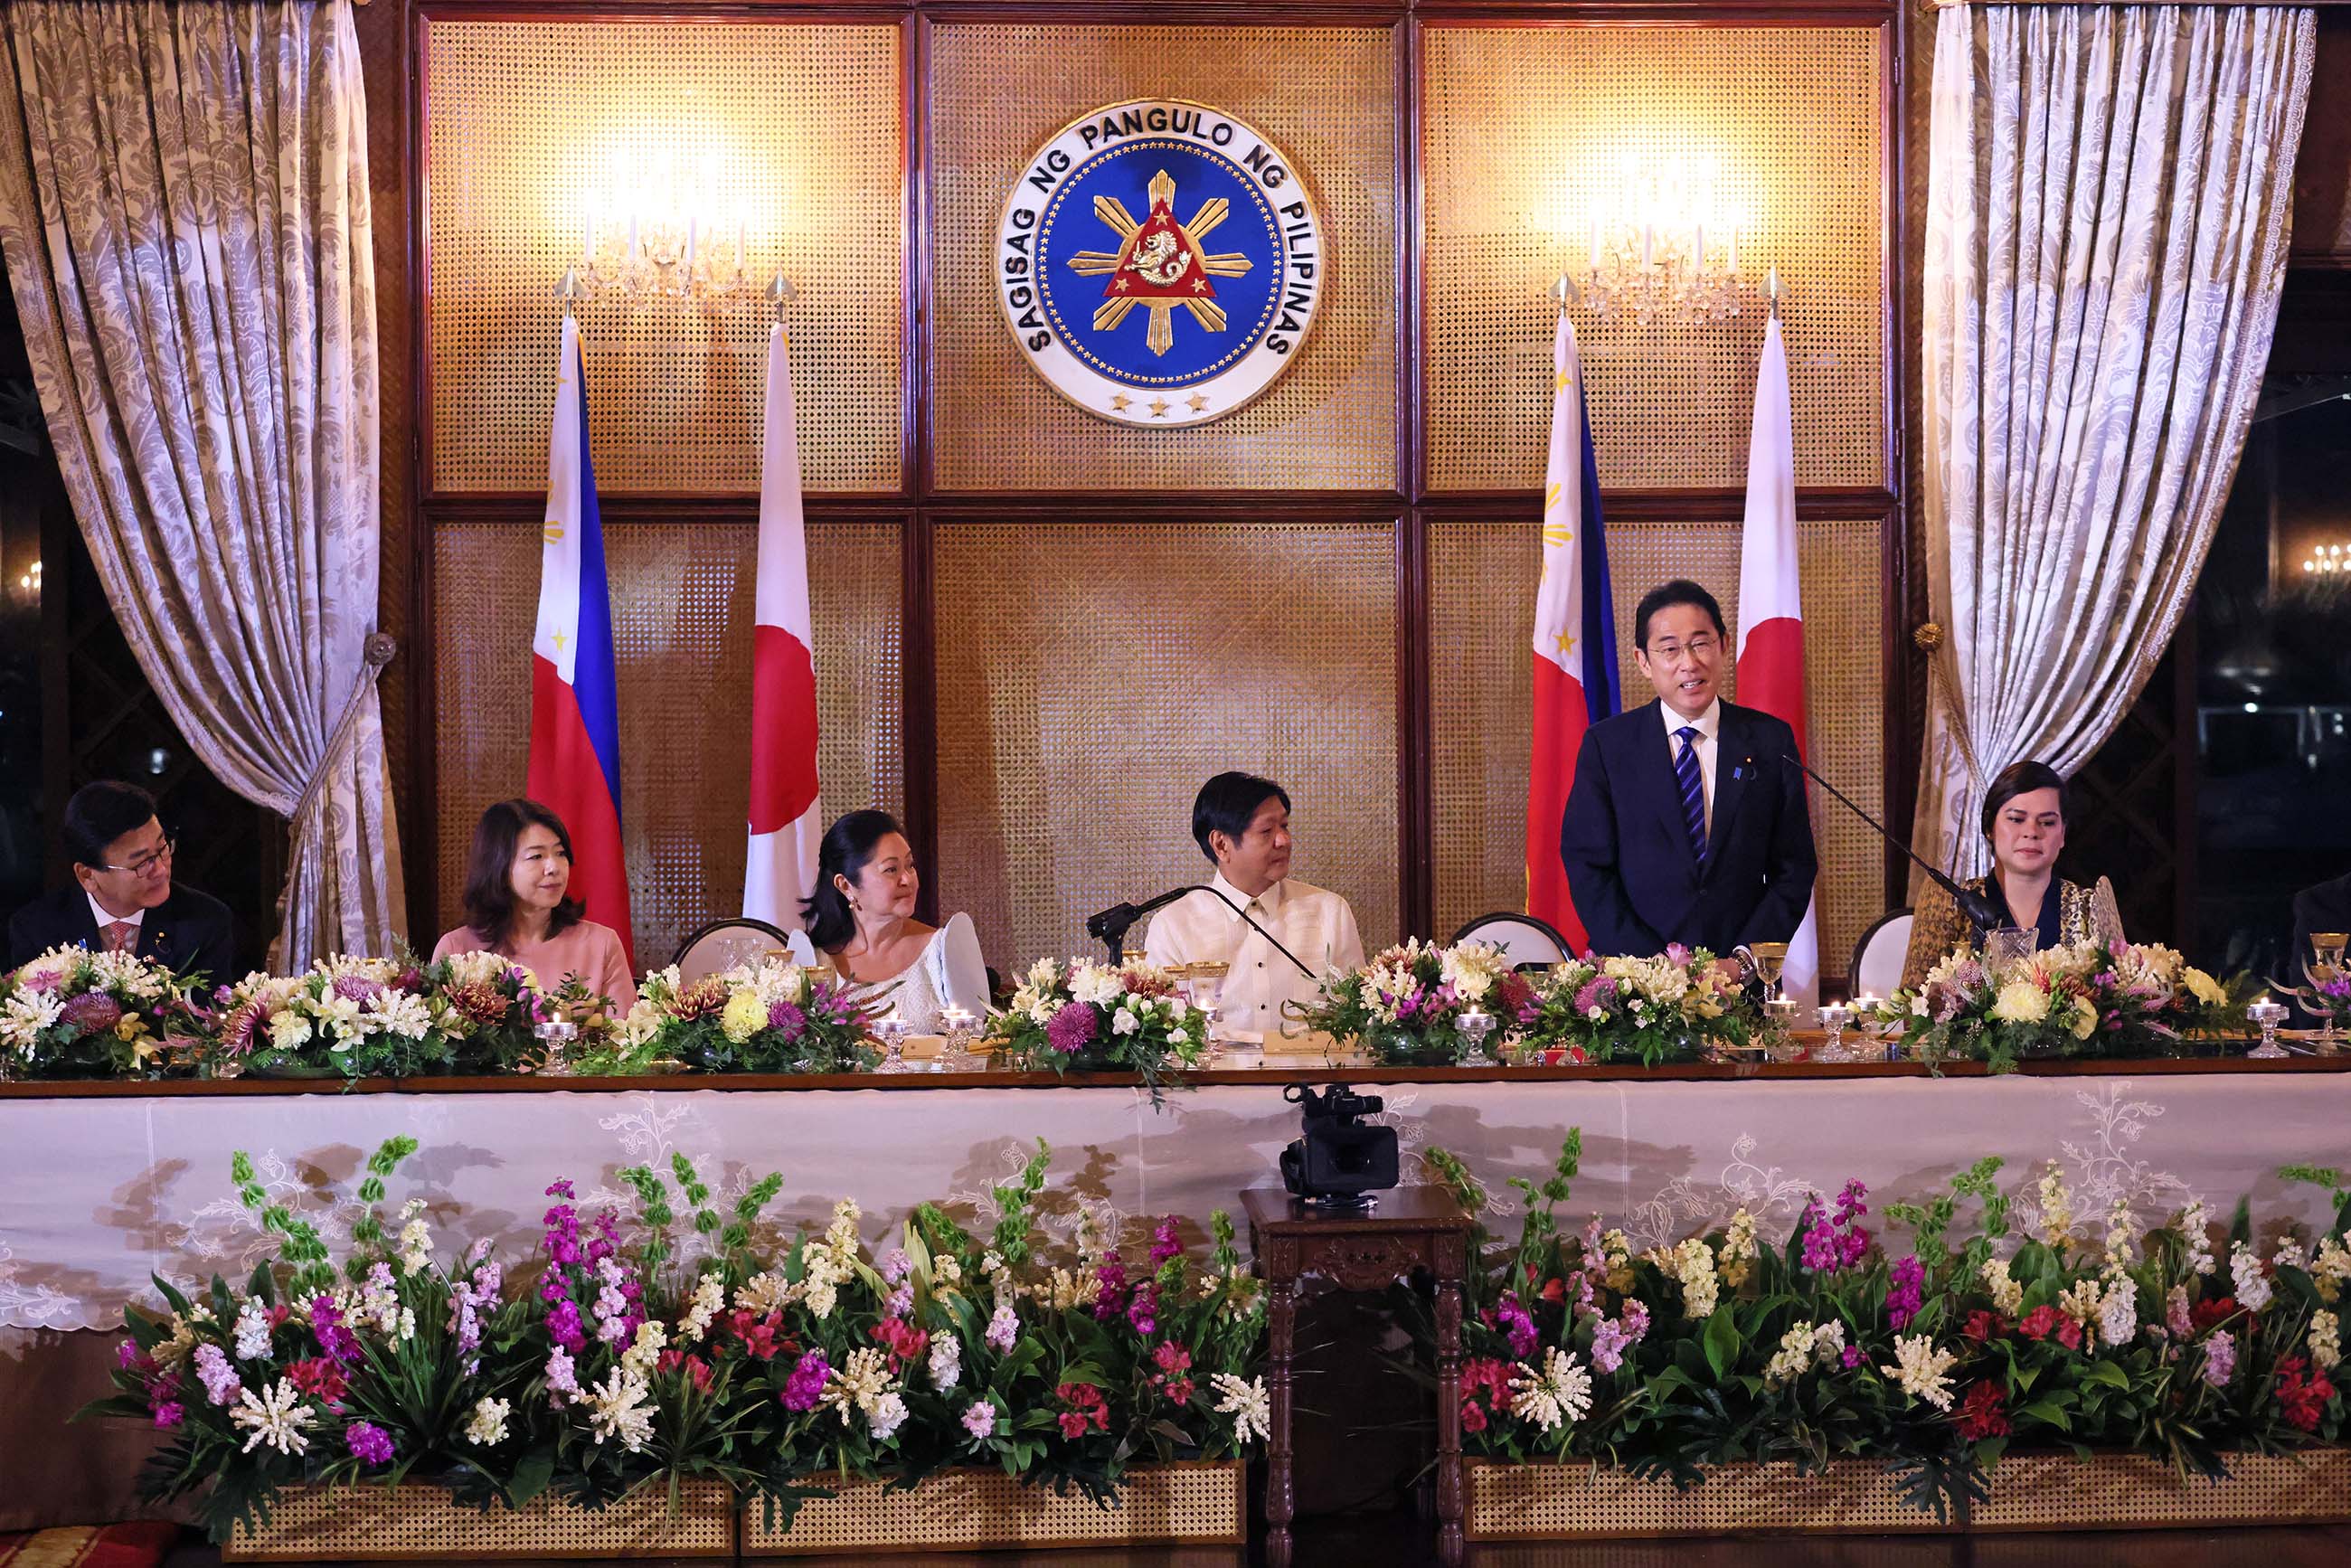 Banquet hosted by President Marcos (5)